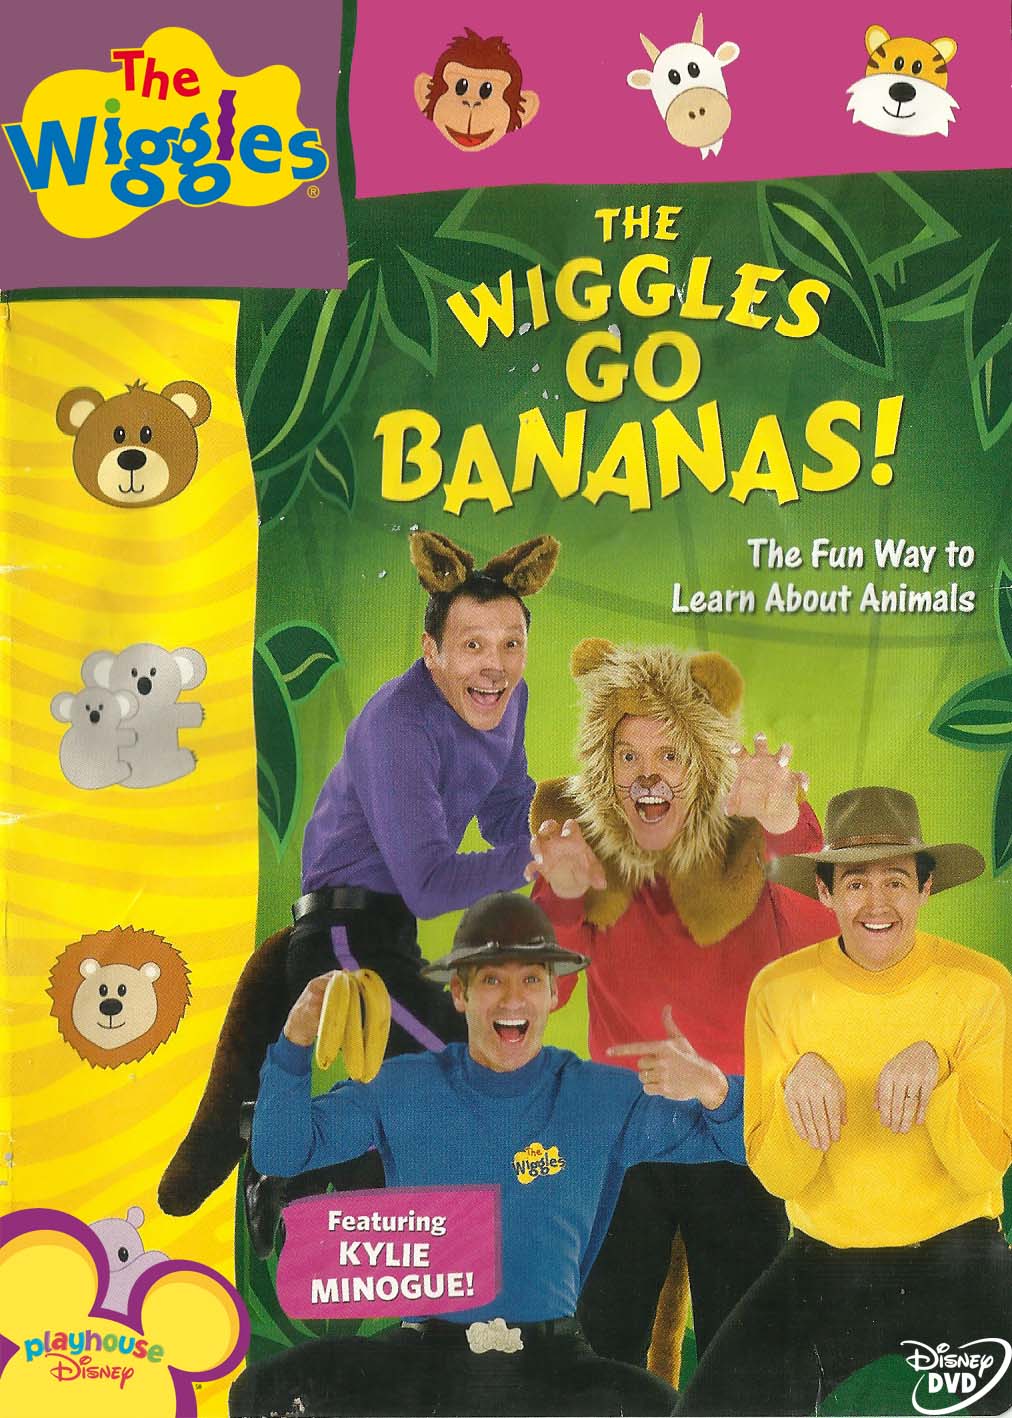 The Wiggles Go Bananas Disney Dvd Cover 2009 By Demicarl On Deviantart